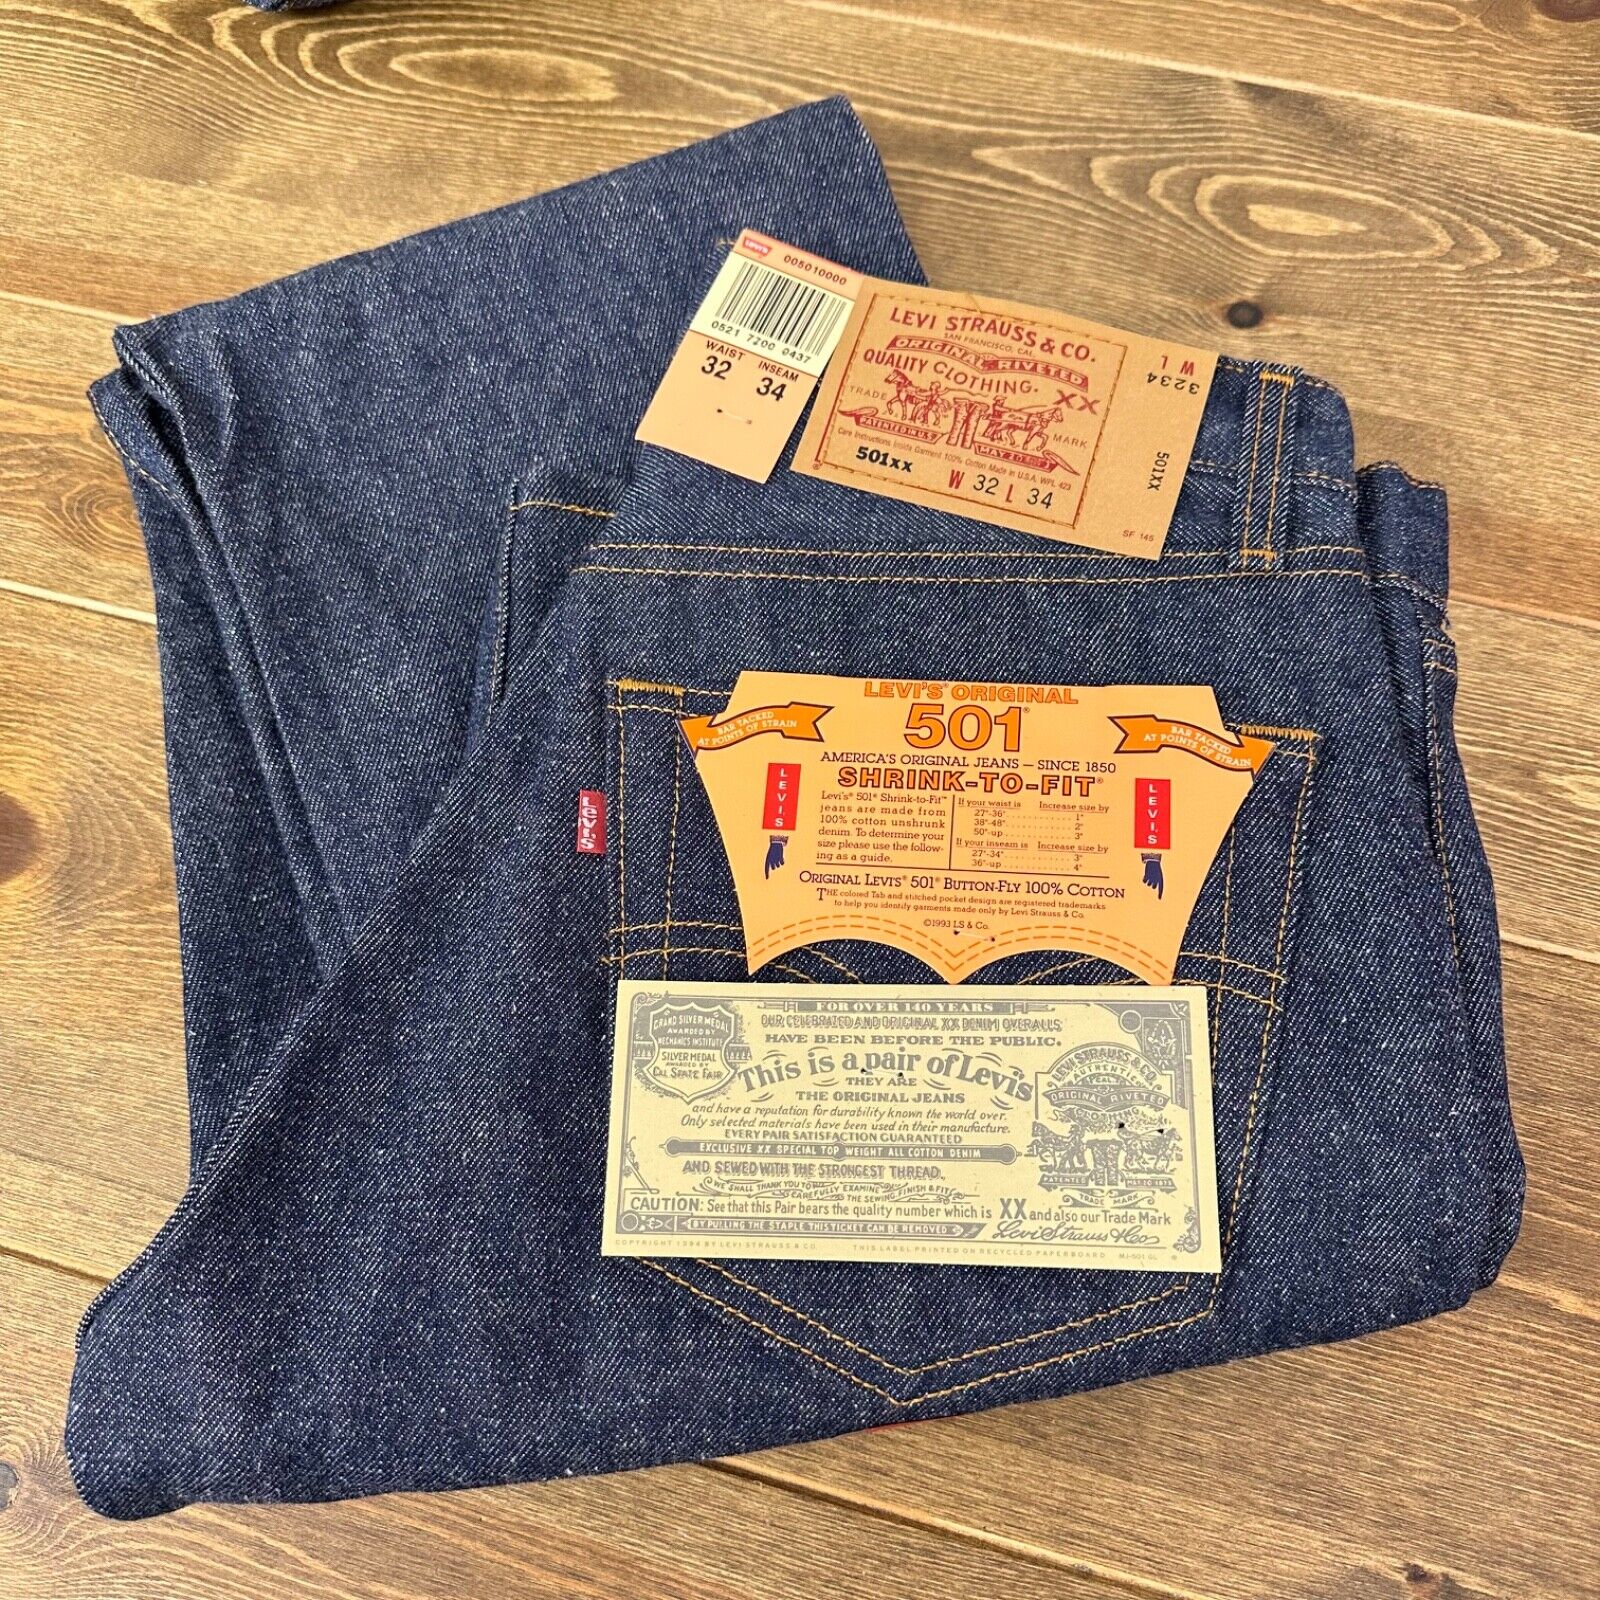 Levi's 501xx Vintage New Deadstock 1997 Raw Shrink-To-Fit Jeans 32x34 USA Made